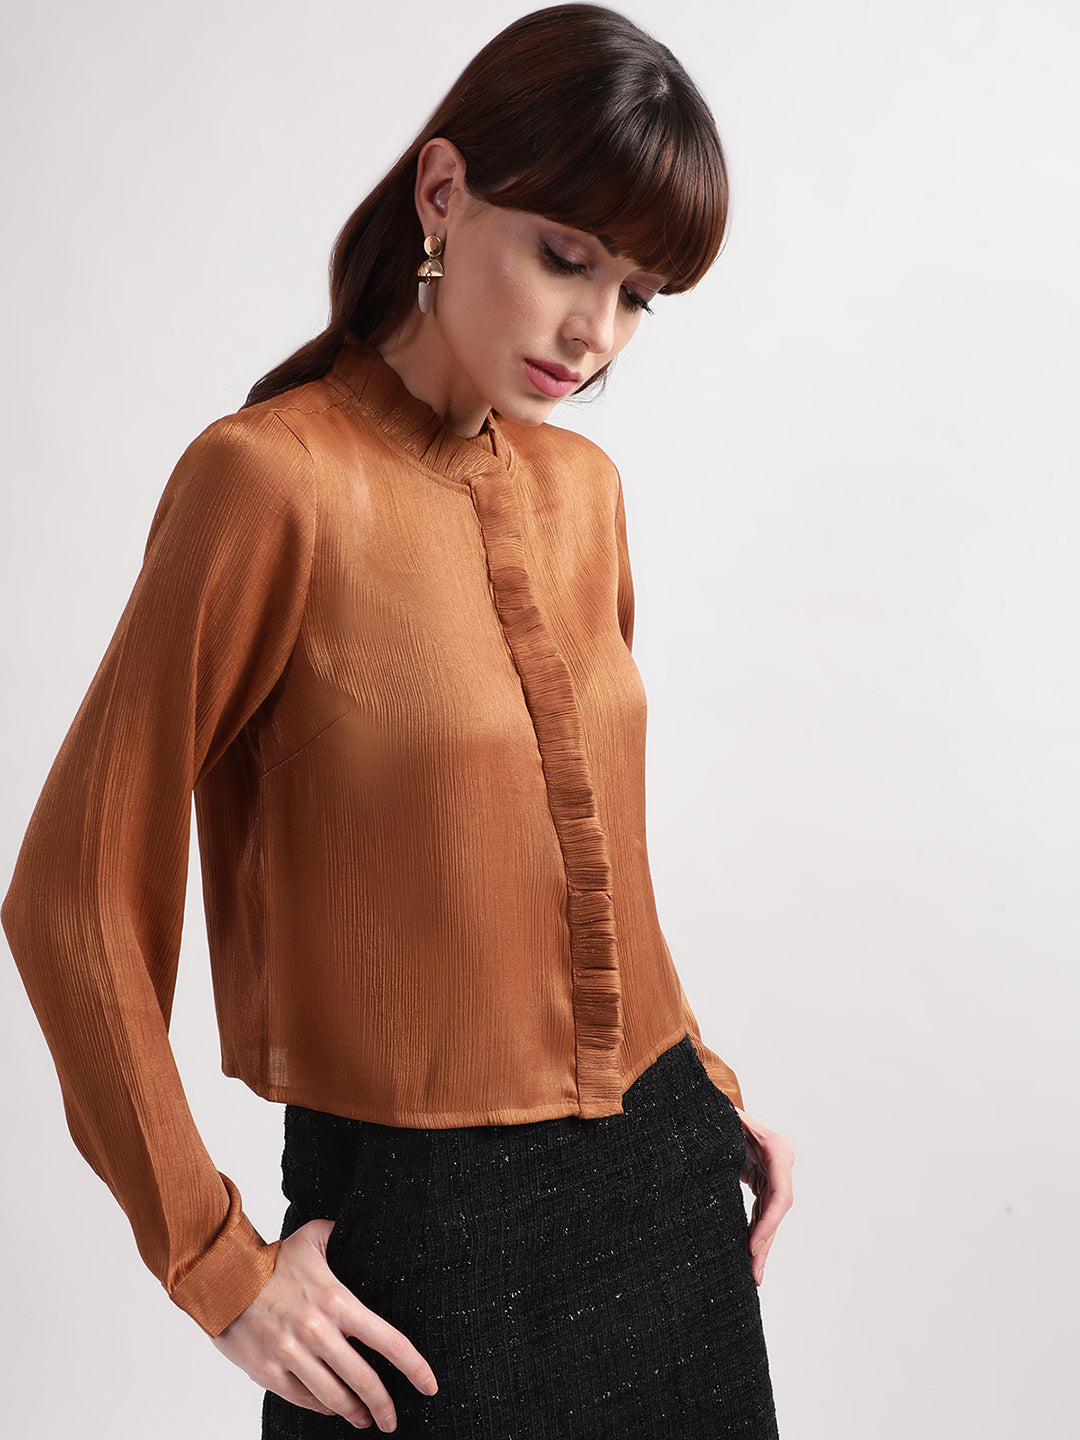 Centre Stage Women Brown Solid Top